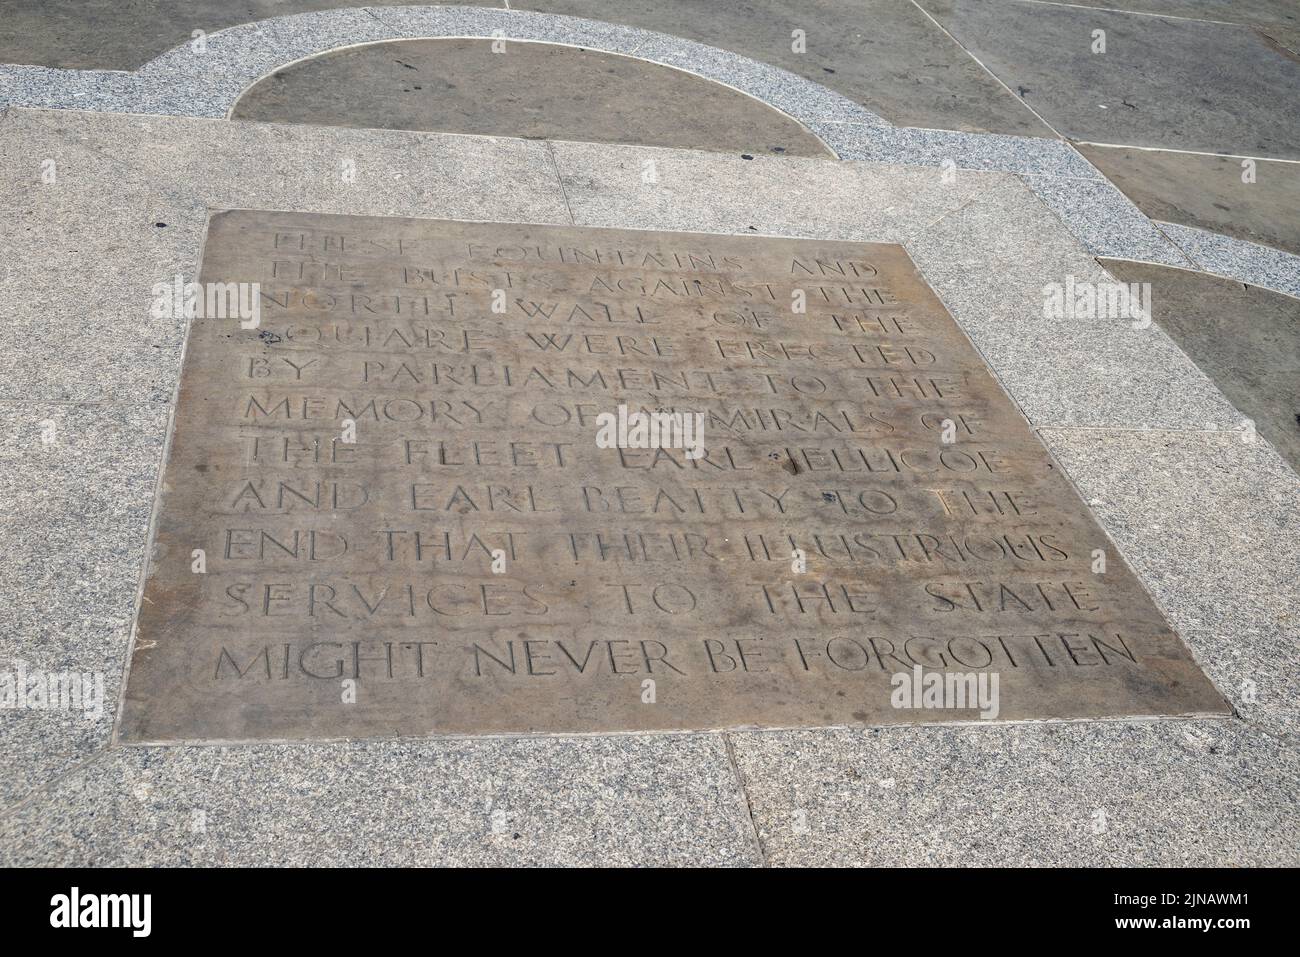 Memorial inscription set in the floor of Trafalgar Square to honour the fountain memorials to Lord Jellicoe and Lord Beatty. Admirals of the fleet Stock Photo